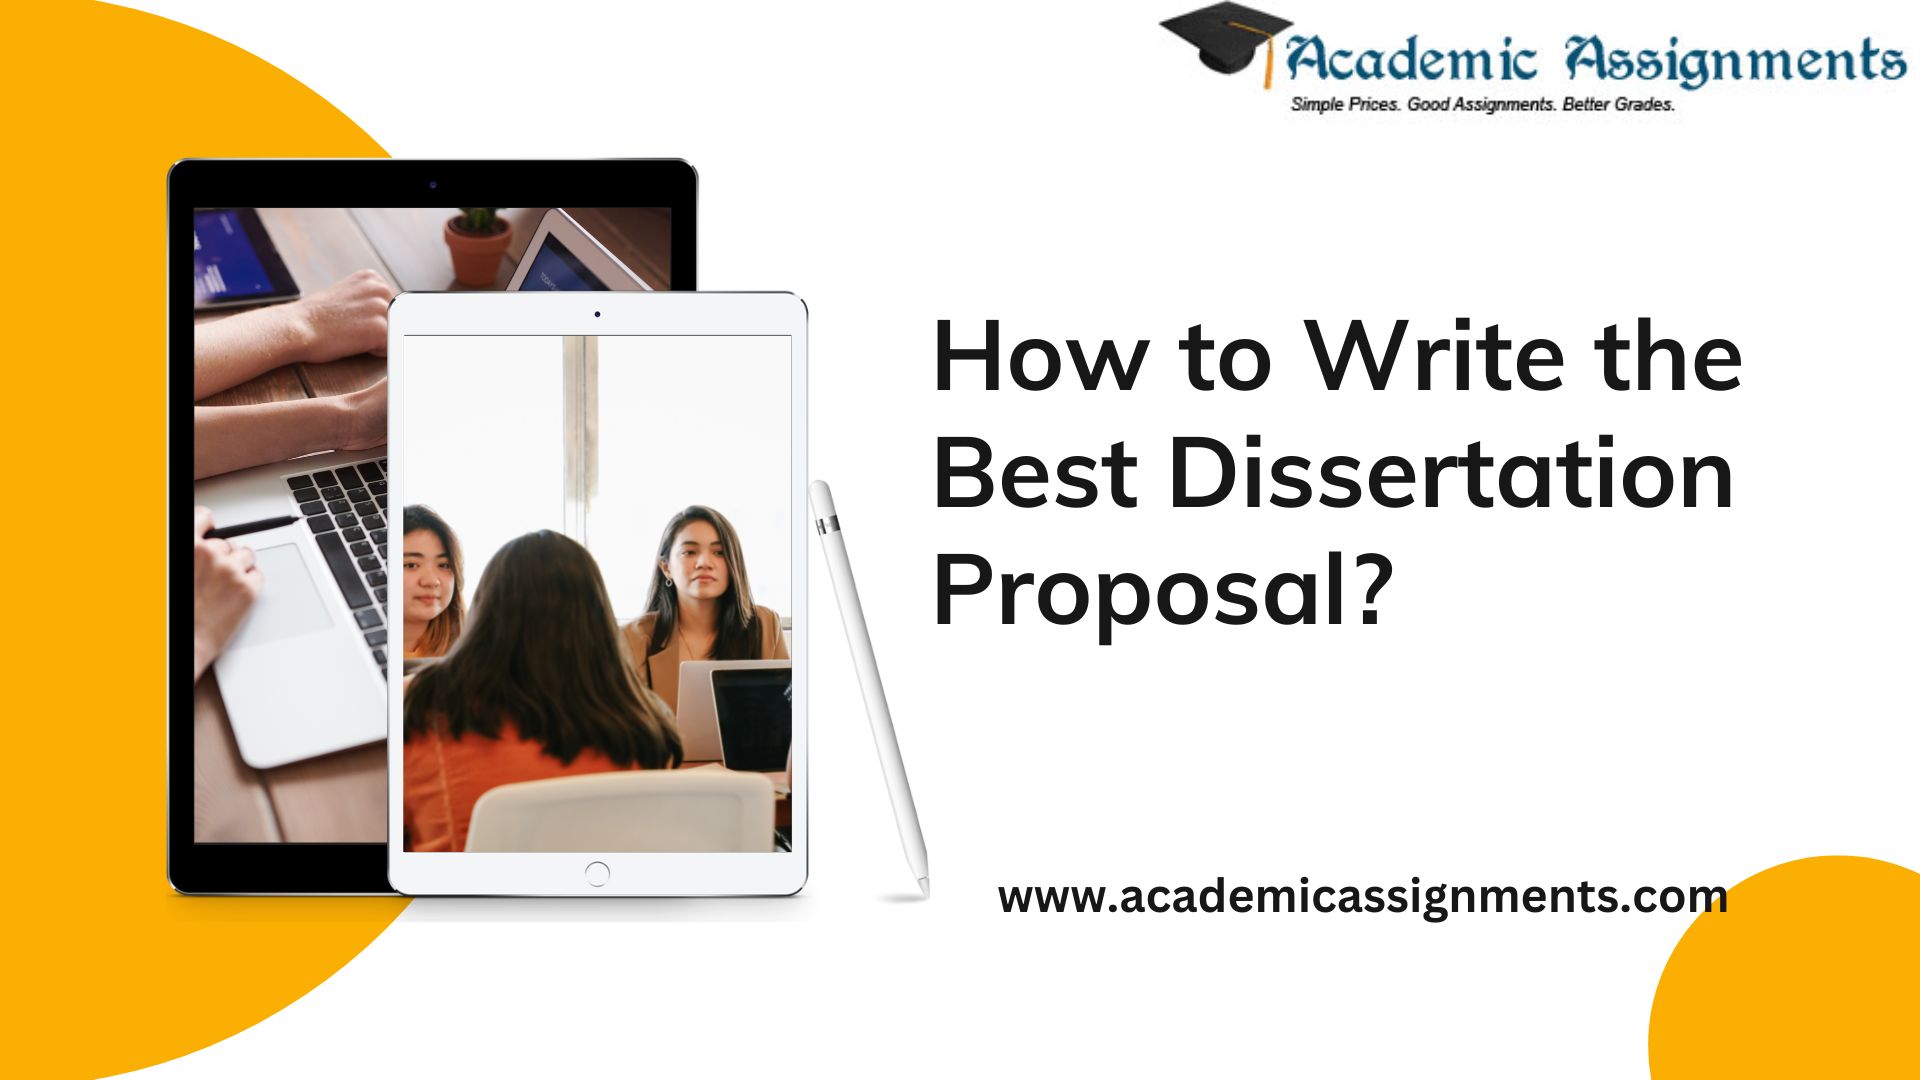 How to Write the Best Dissertation Proposal